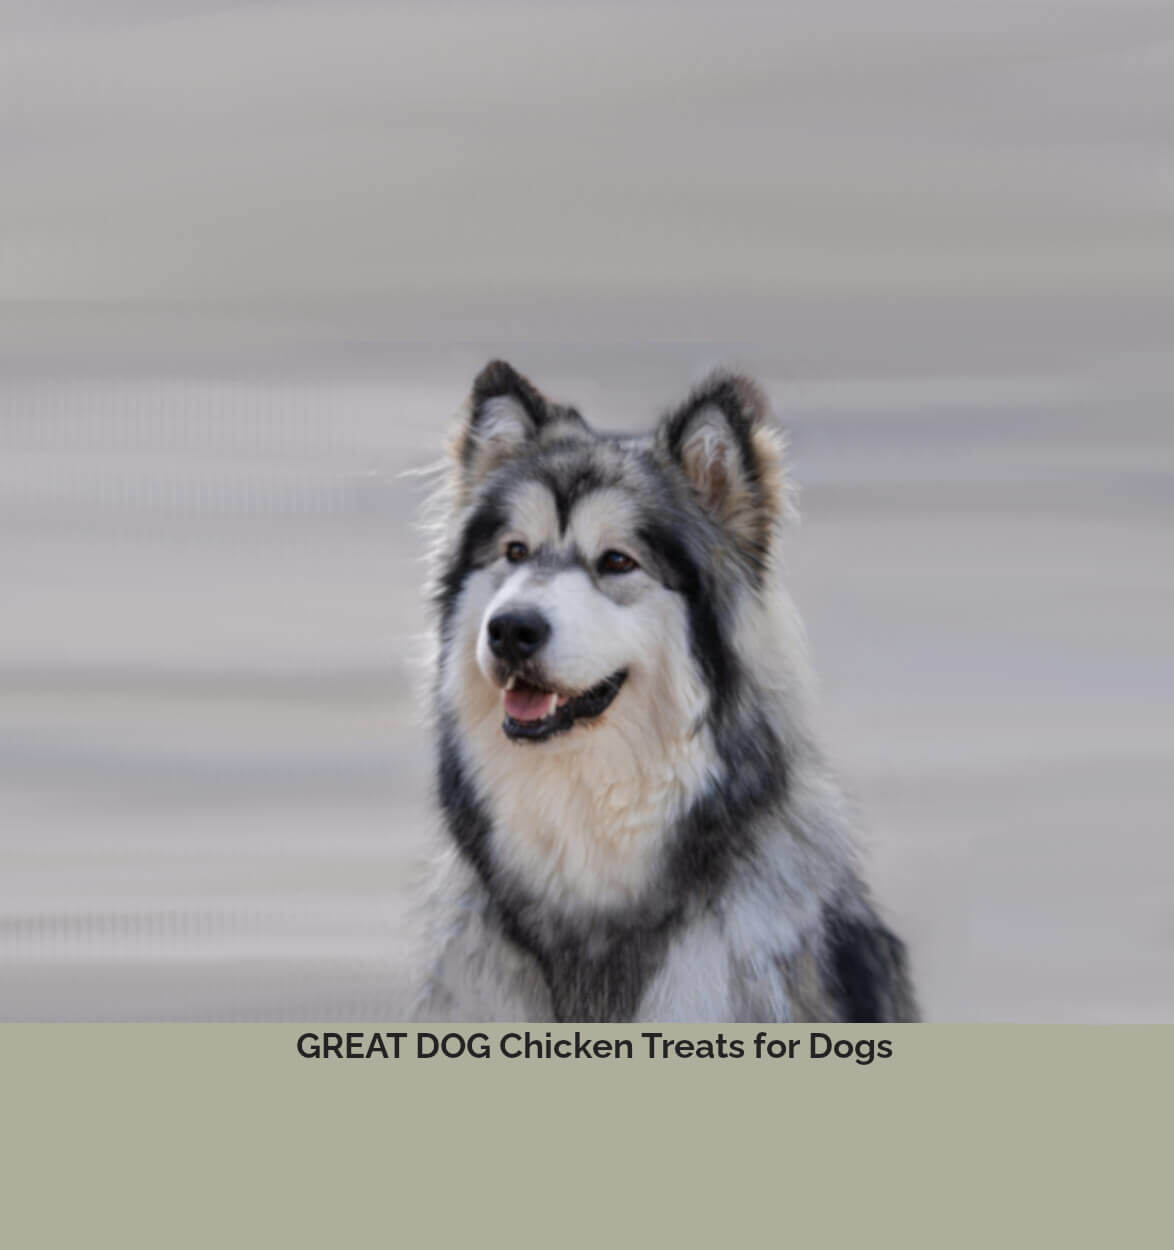 alaskan-malamute-dog-image-with-text-chicken-treats-for-dogs